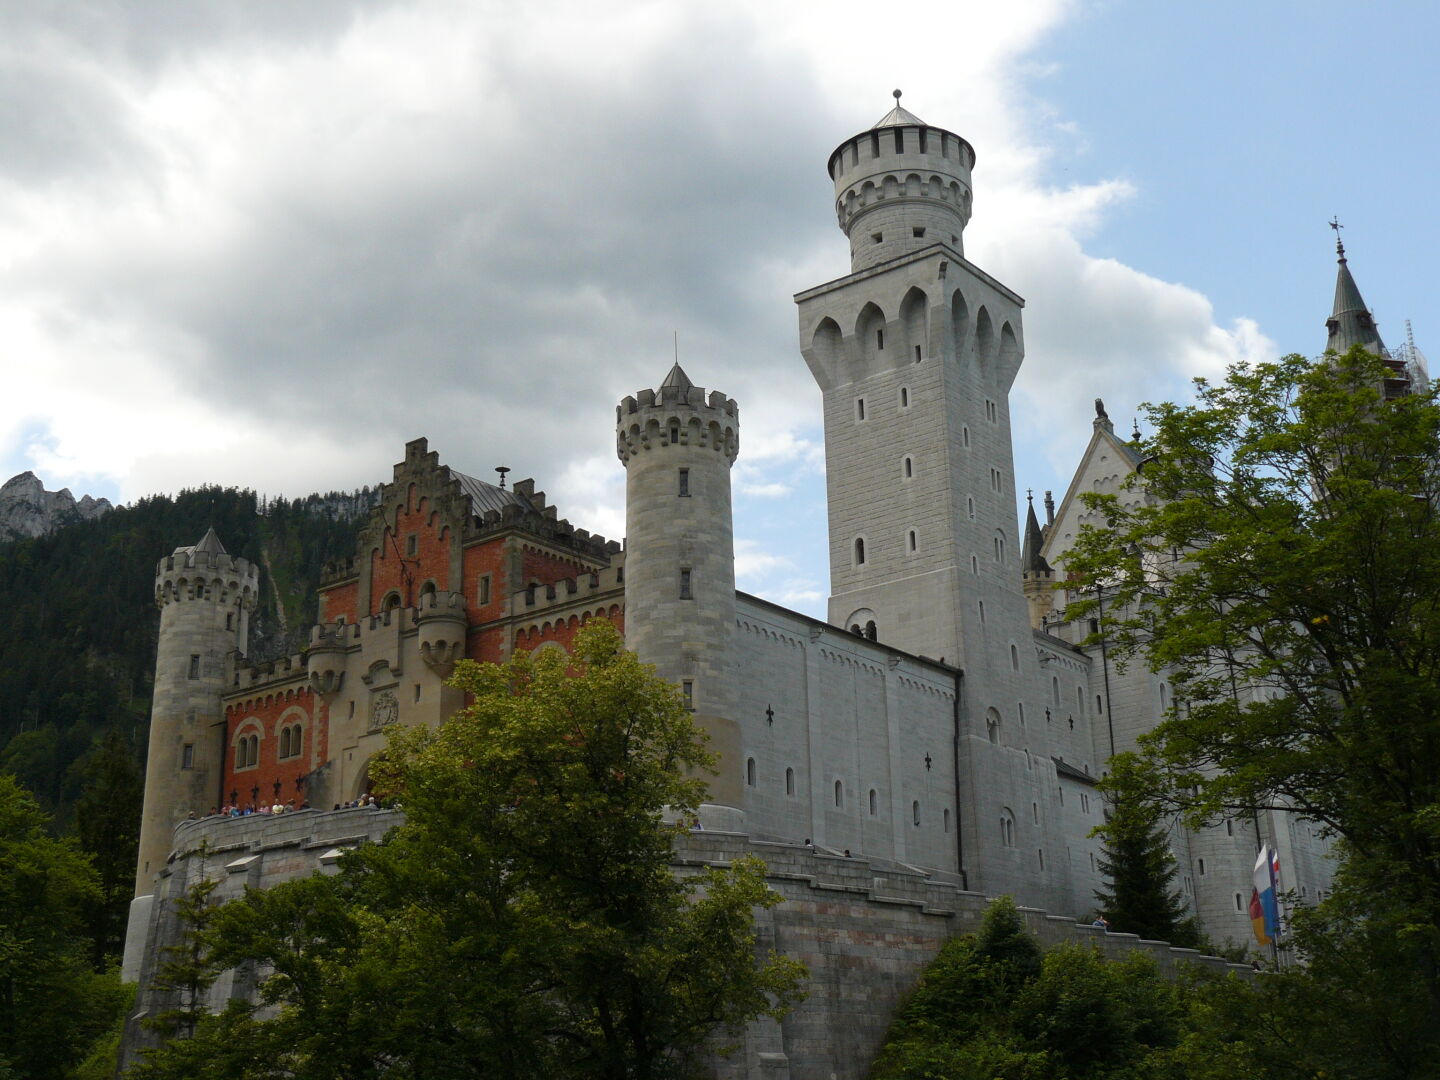 And here it is, Germany&rsquo;s most famous building, from the north-east. Castle Neuschwanstein. Commissioned bei King Ludwig II, it wasn&rsquo;t even finished when he died at age 41.